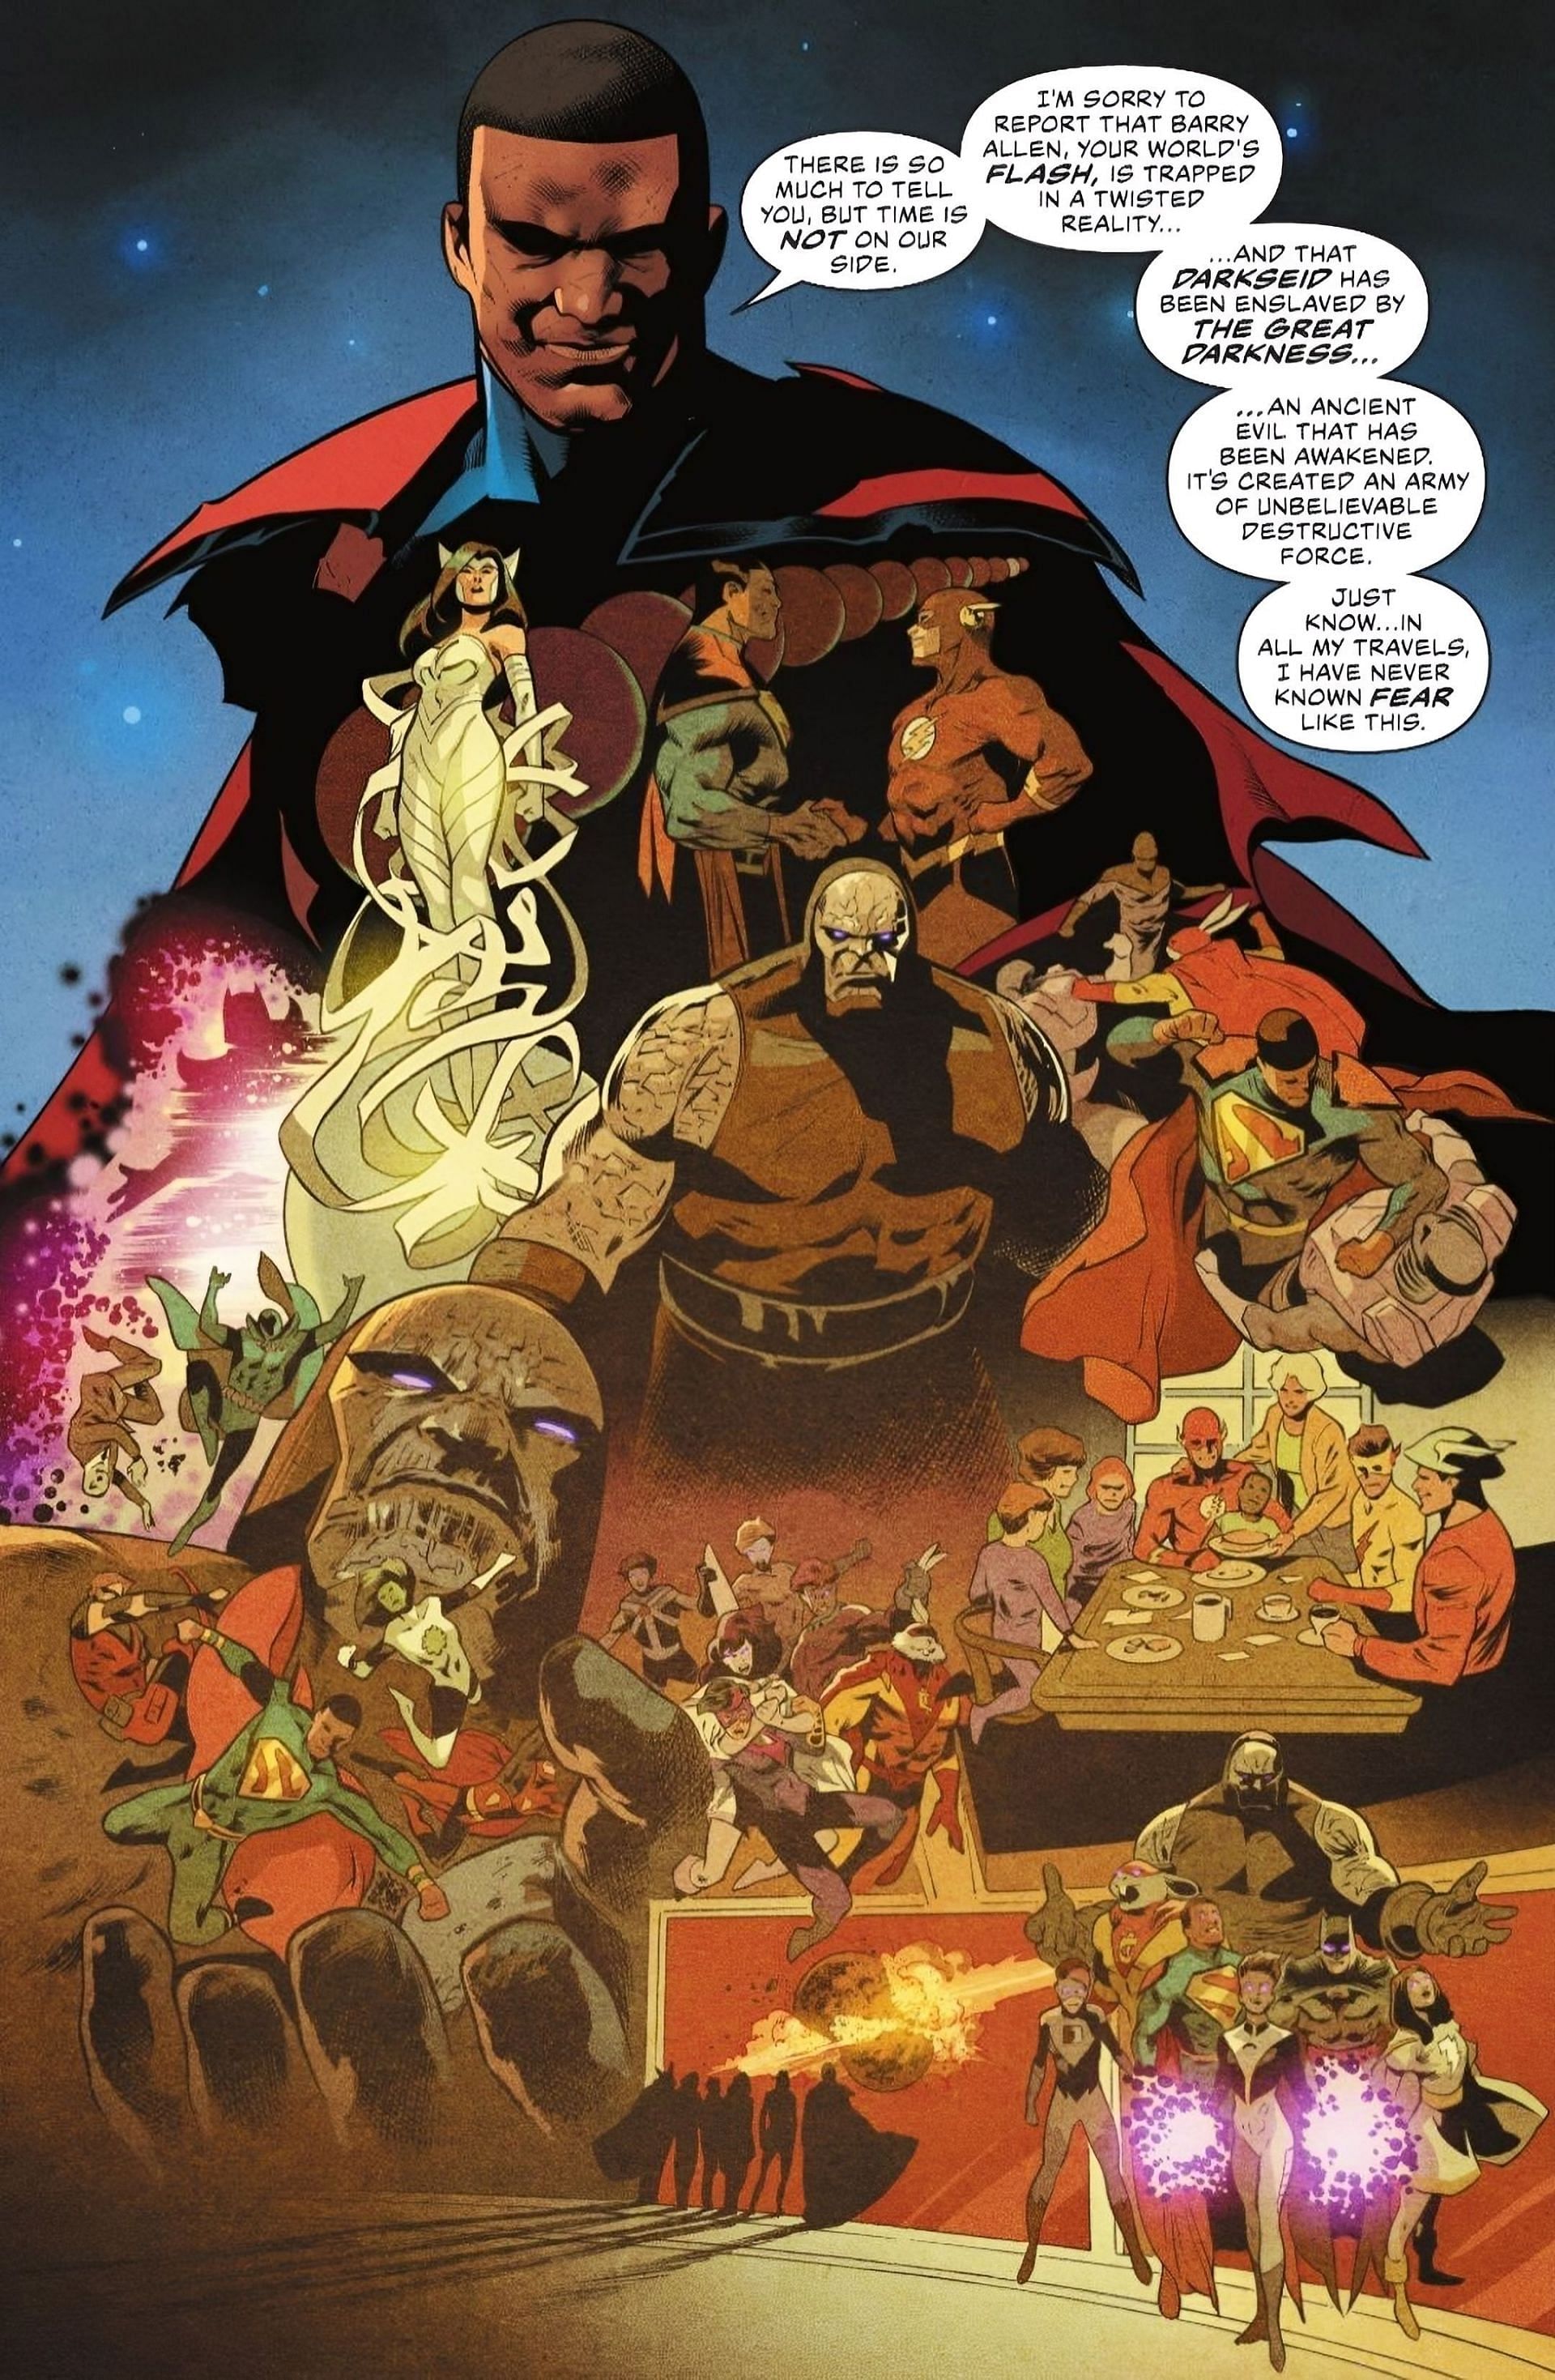 A page from the comic (Image via DC Comics)